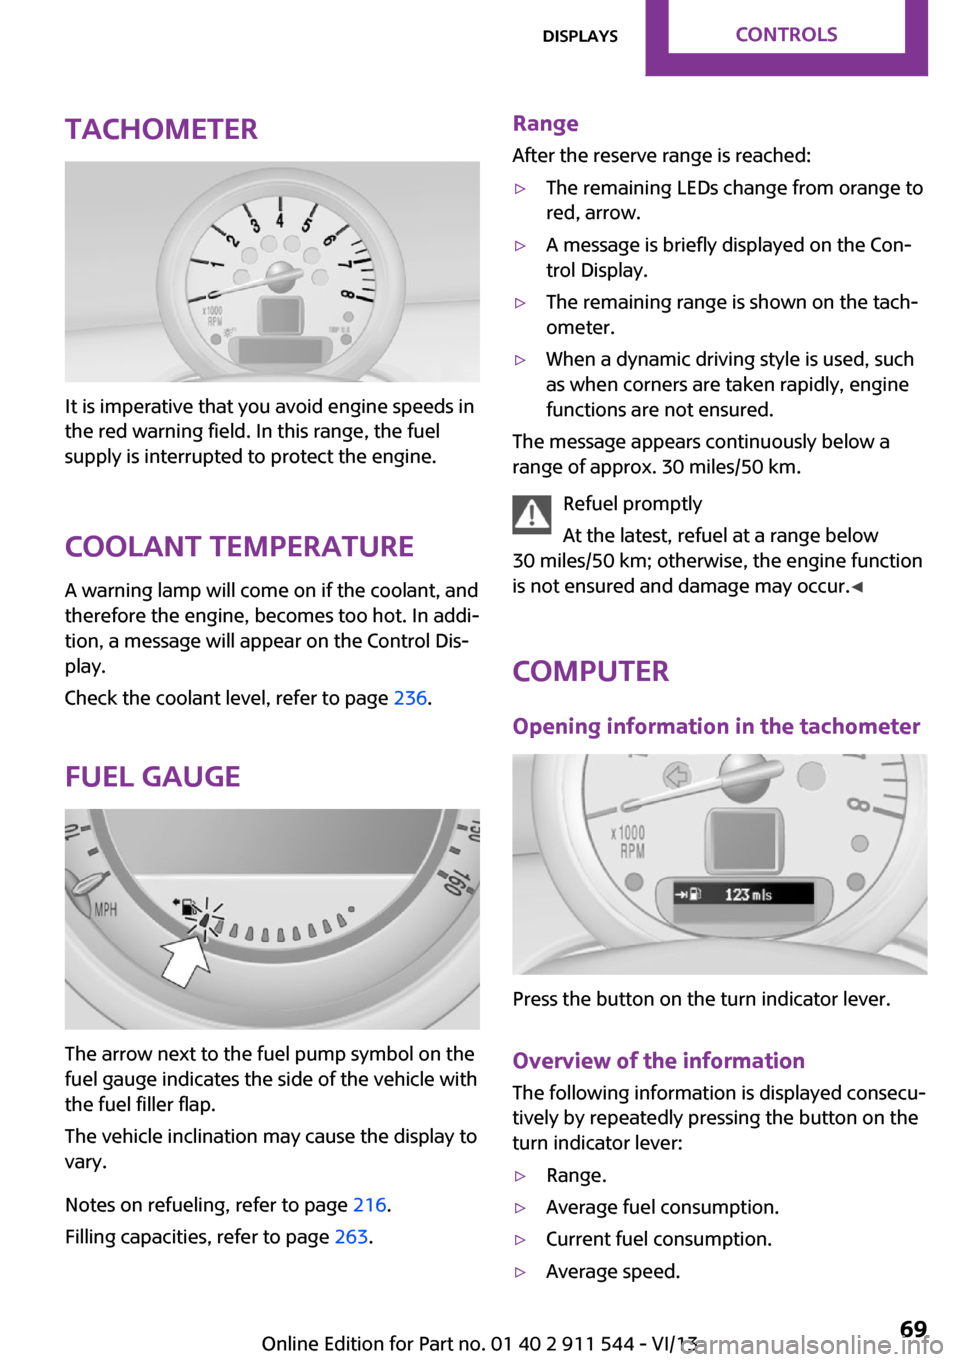 MINI Countryman 2014  Owners Manual (Mini Connected) Tachometer
It is imperative that you avoid engine speeds in
the red warning field. In this range, the fuel
supply is interrupted to protect the engine.
Coolant temperature A warning lamp will come on 